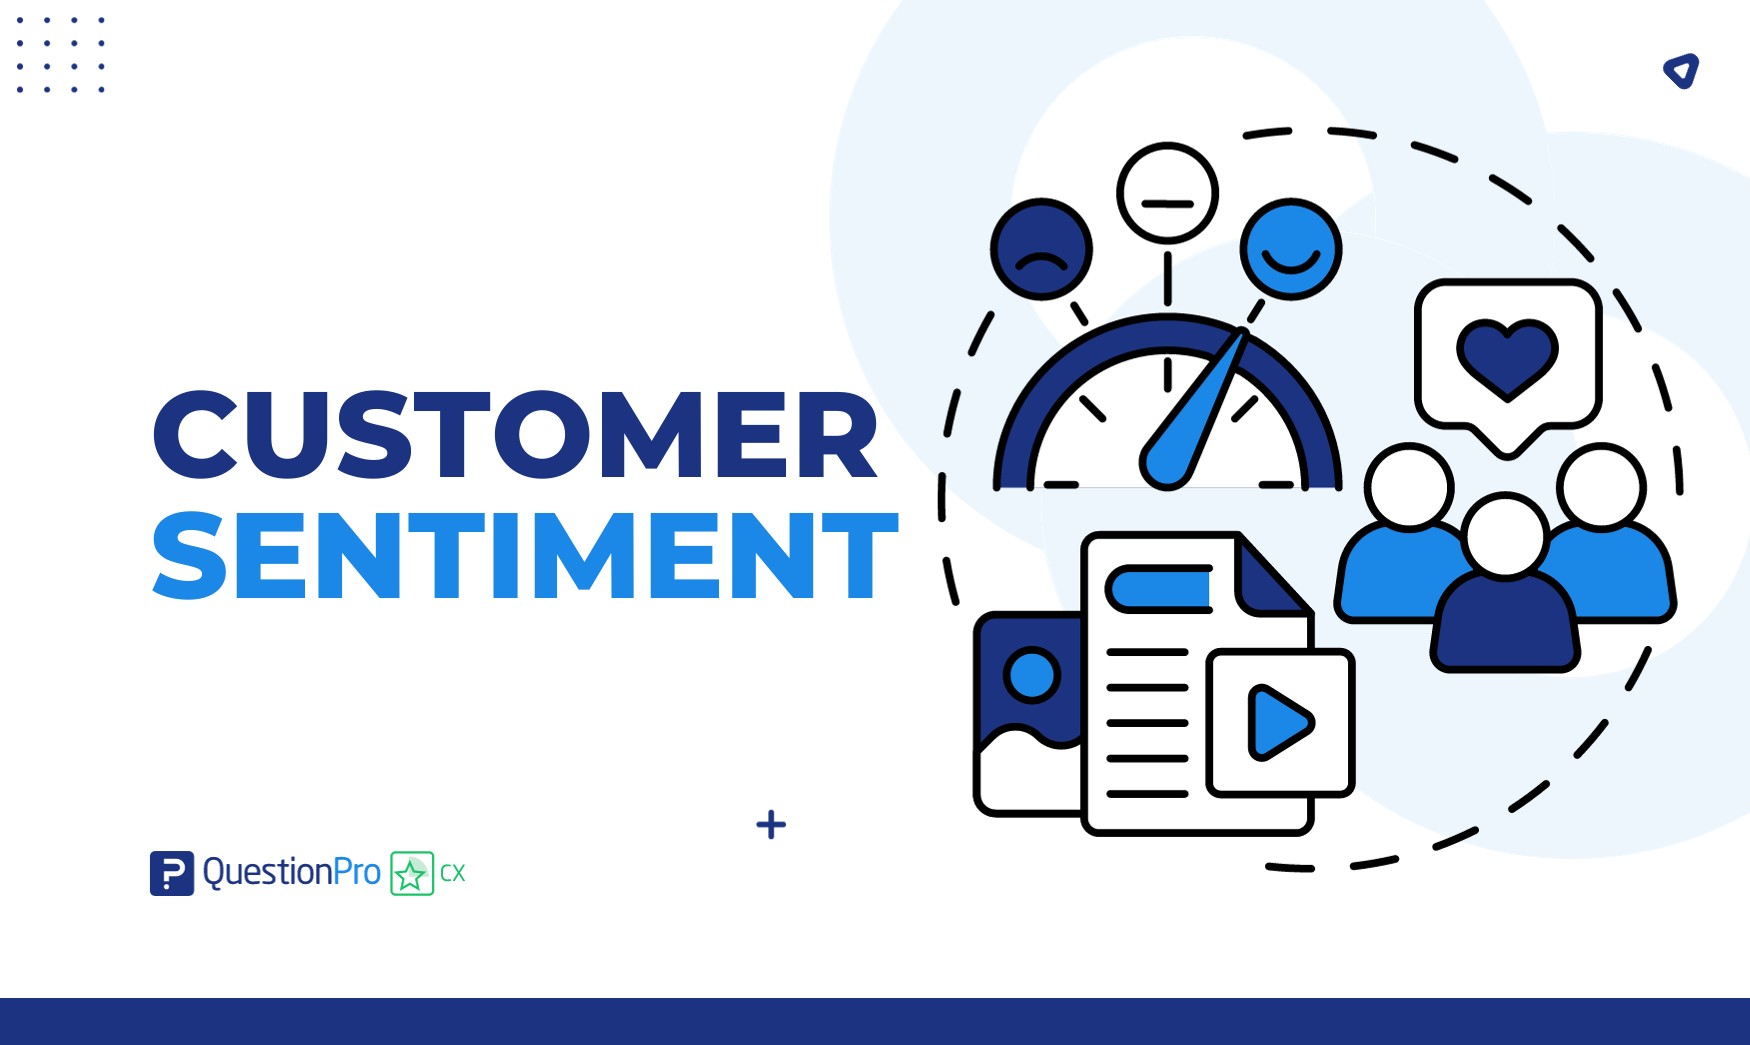 Customer sentiment is customers' collective feelings and opinions regarding a product, service, or brand. Learn what it is and more.